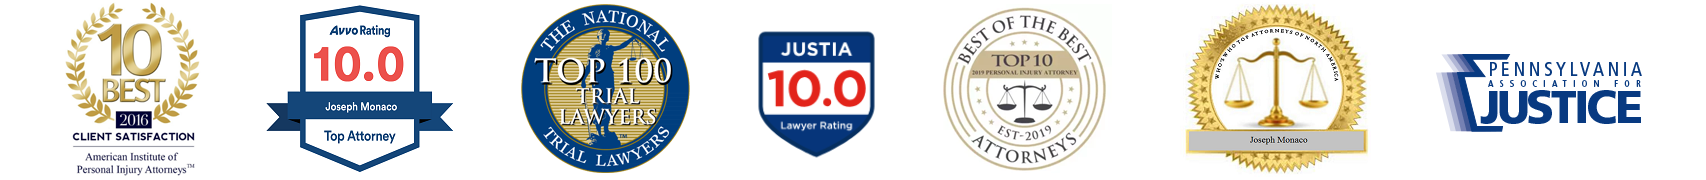 10 Best 2016 Client Satisfaction | American Institute of Personal Injury Attorneys